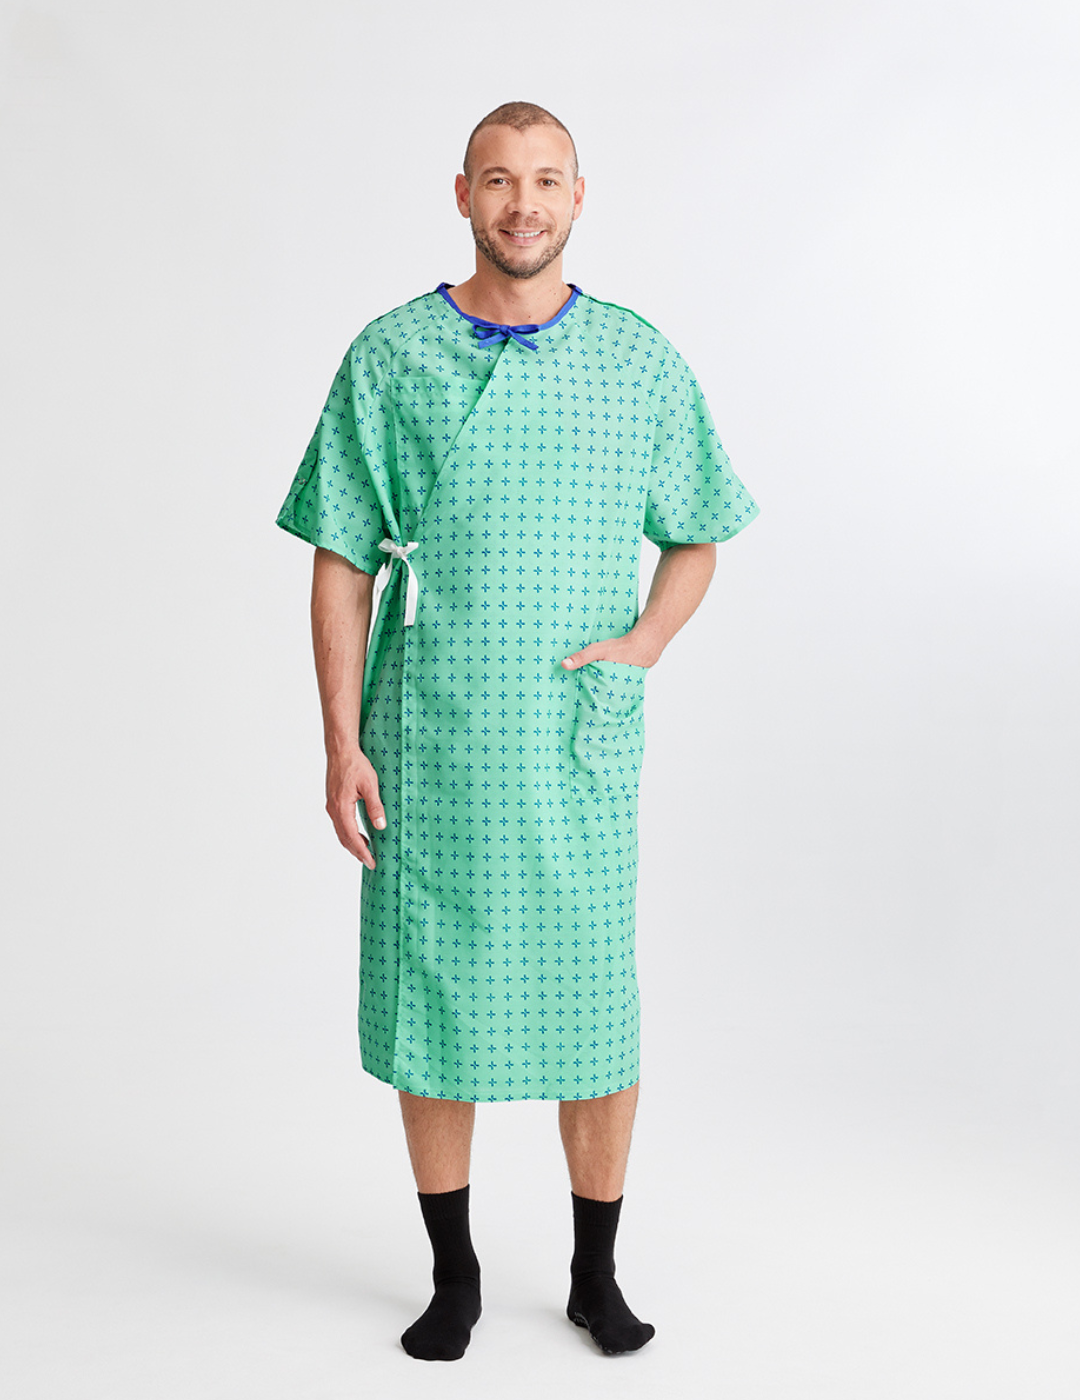 Hospital Patient Gown by Care+Wear x Parsons Standard